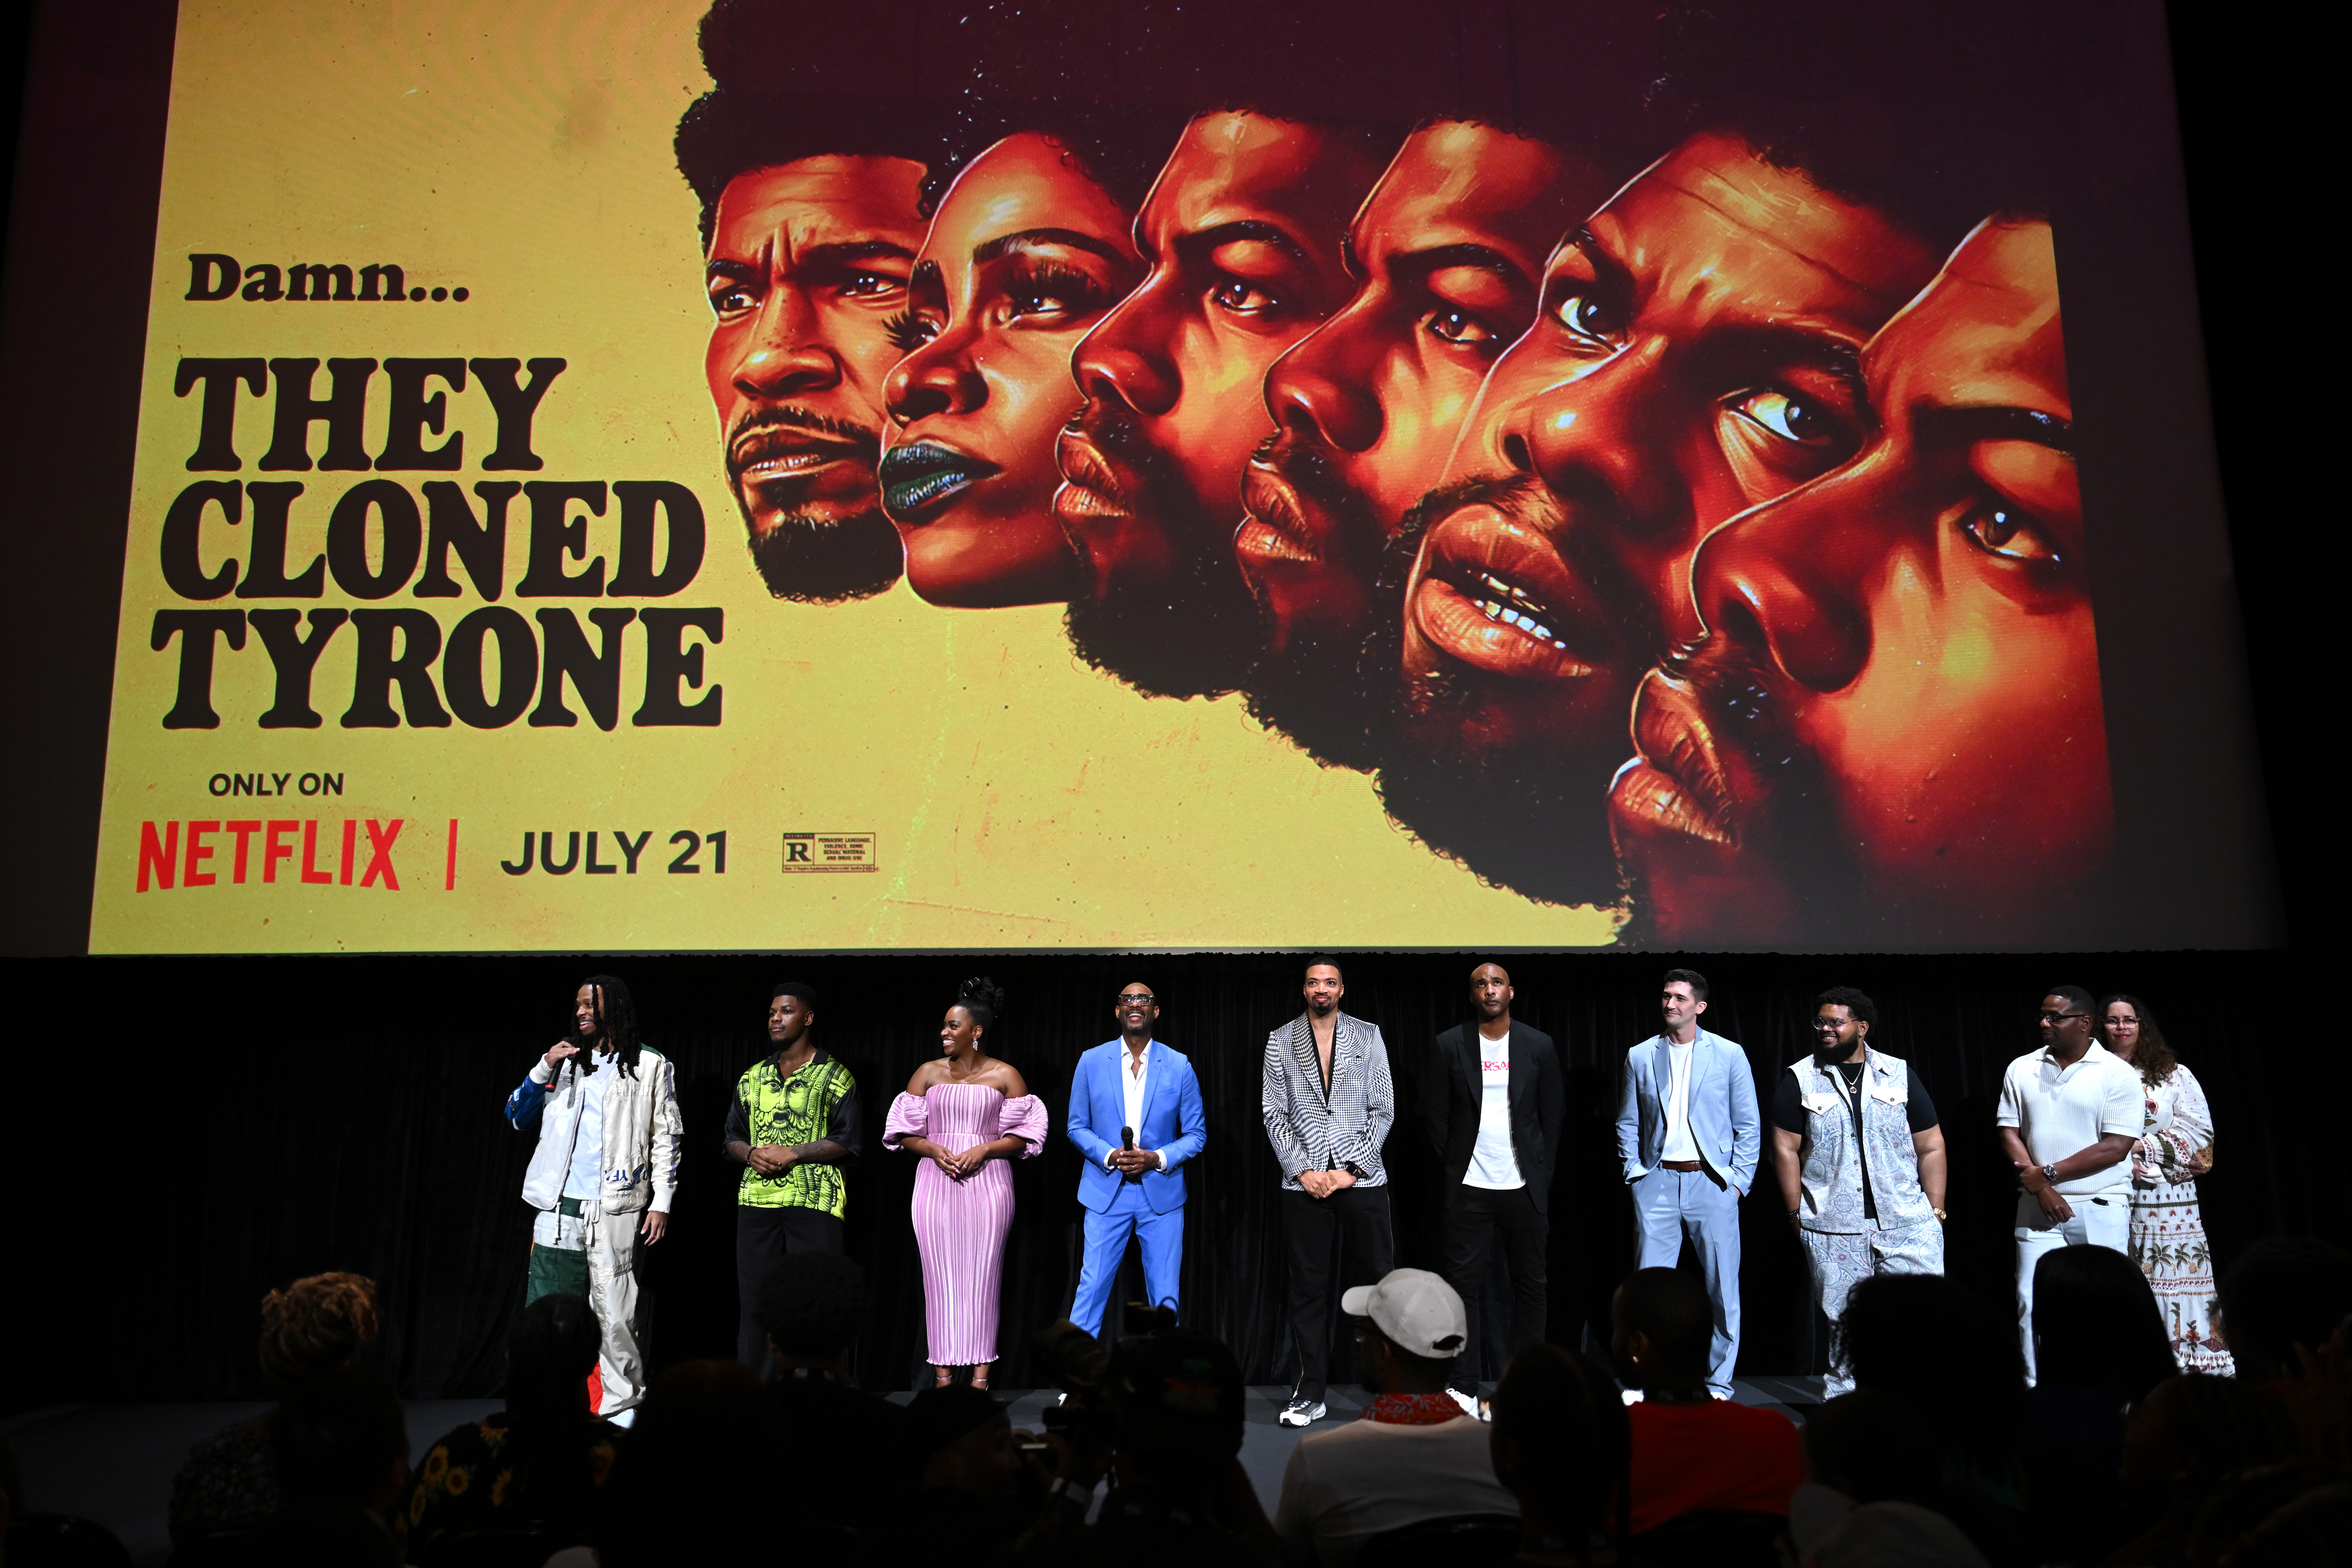 They Cloned Tyrone cast: 'They Cloned Tyrone': Know about cast and